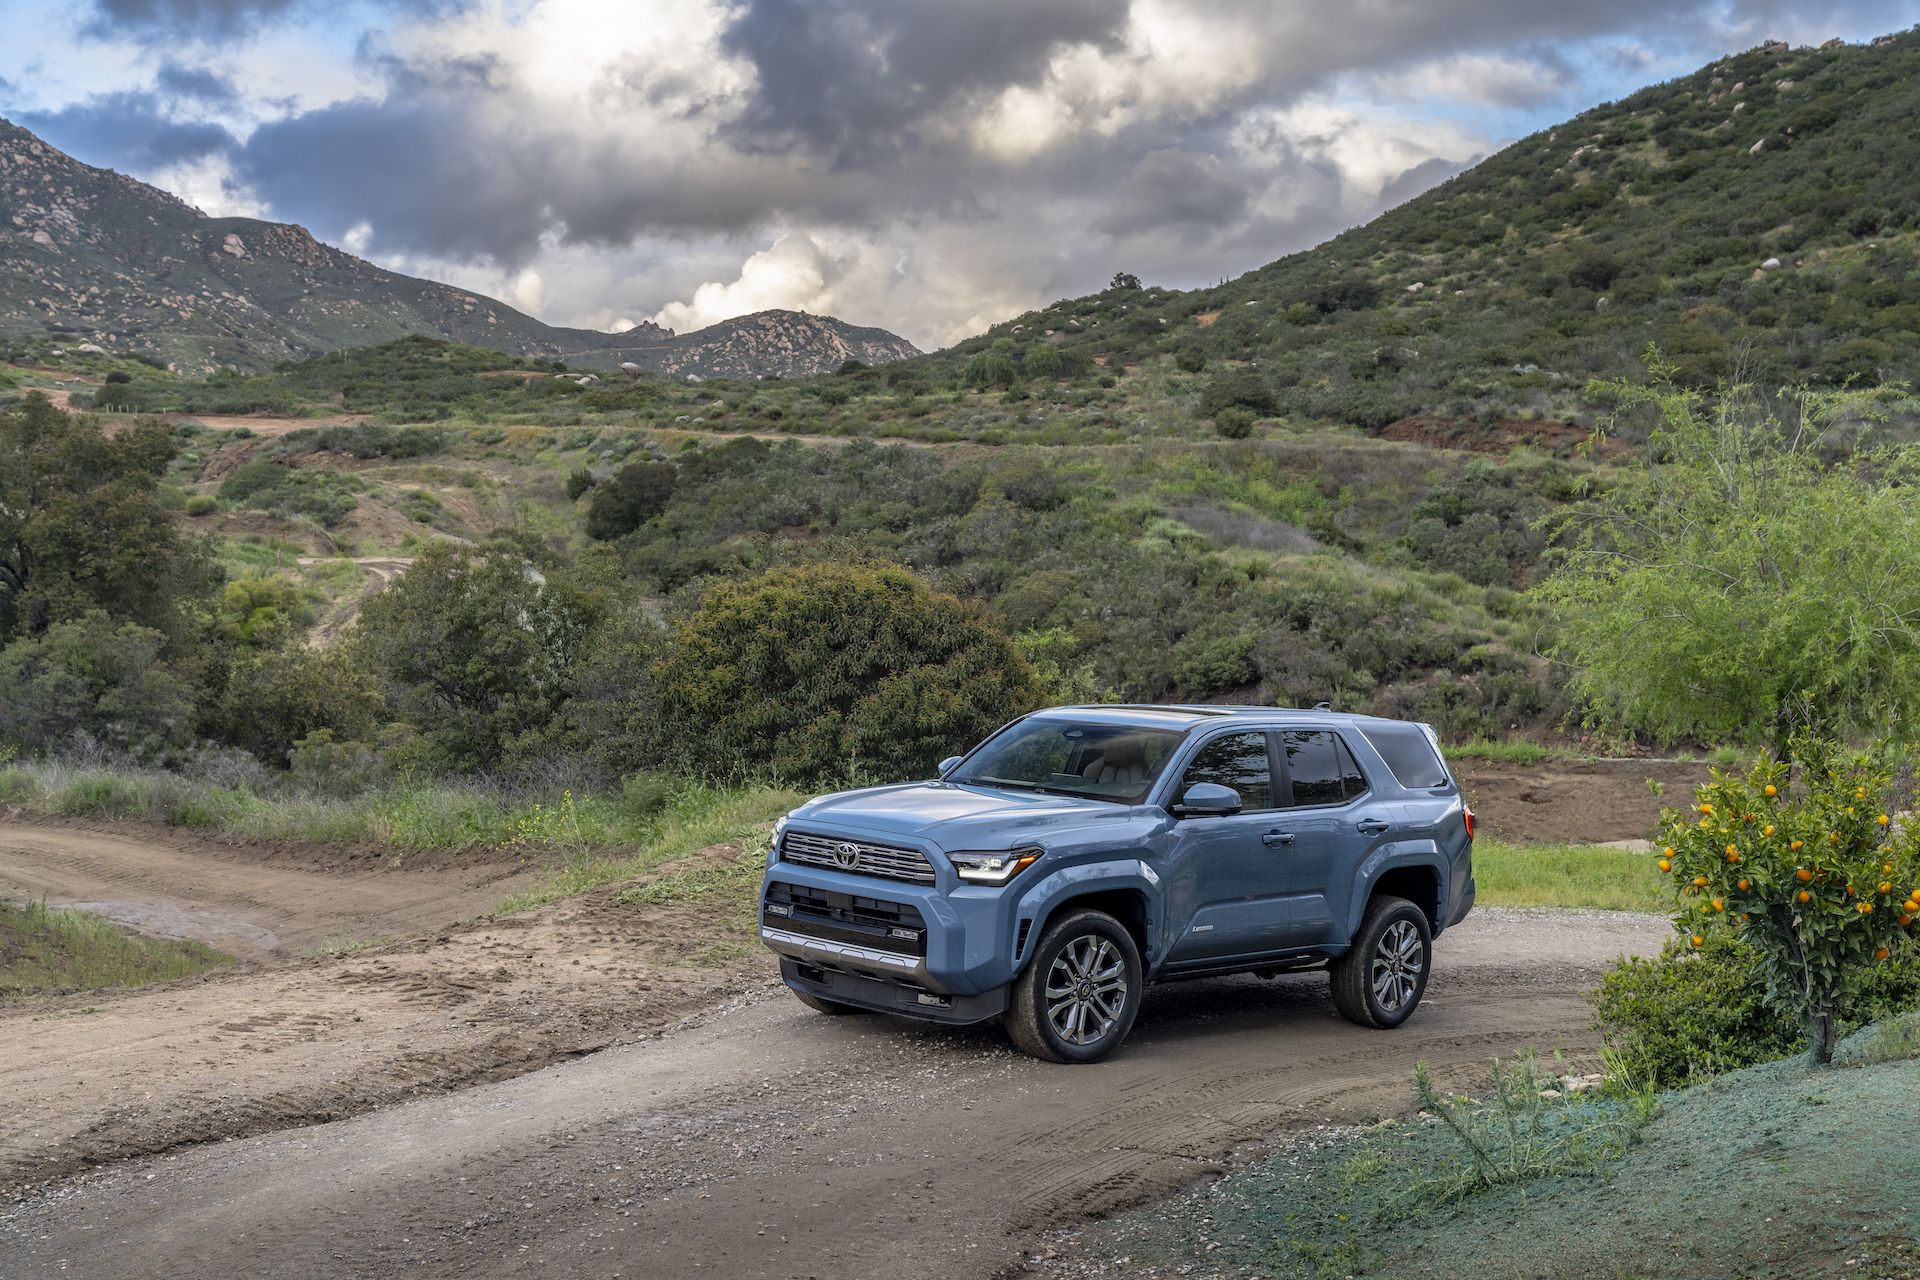 2025 Toyota 4runner Photos: 2025 4Runner LIMITED (Interior, Cargo Space, Exterior) in Heritage Blue color 2025-toyota-4runner-limited-108-jpg-6615620b104f8